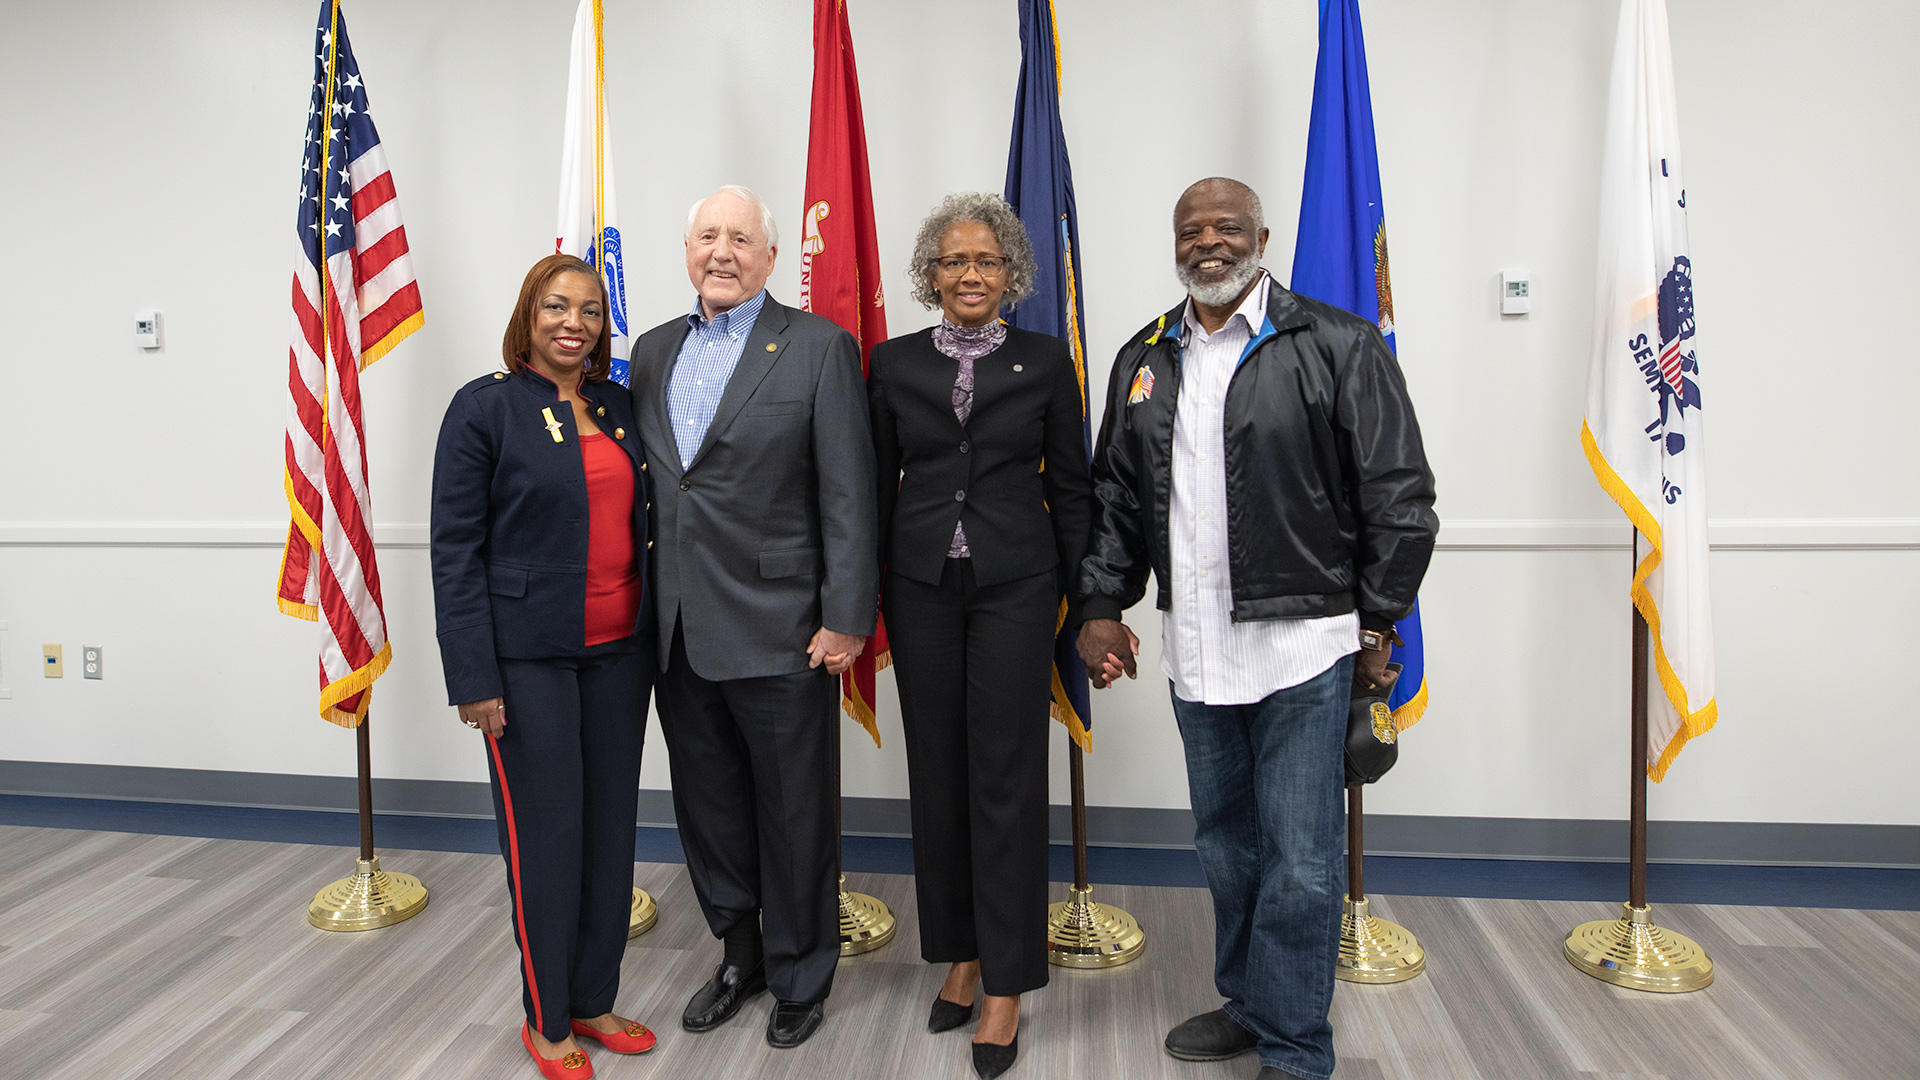 UHCL honors veterans at ceremony